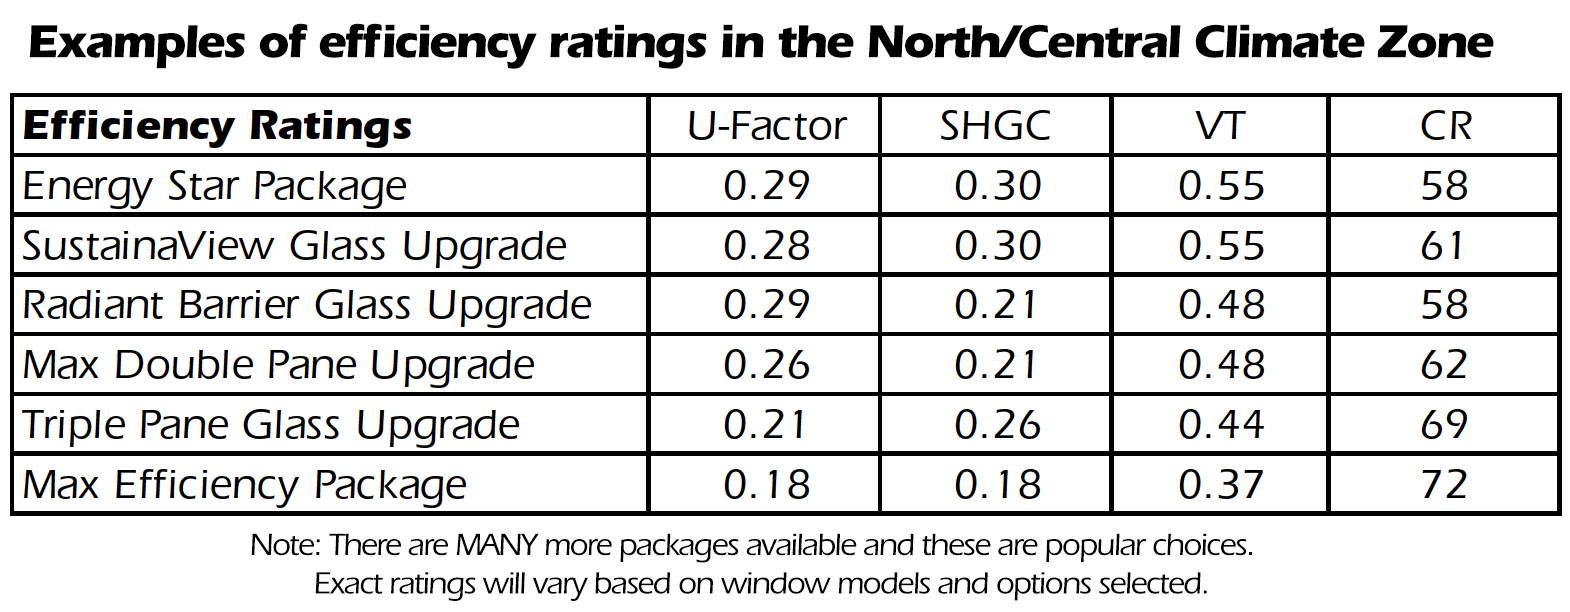 Energy efficiency ratings for popular window options in the DC metro area.